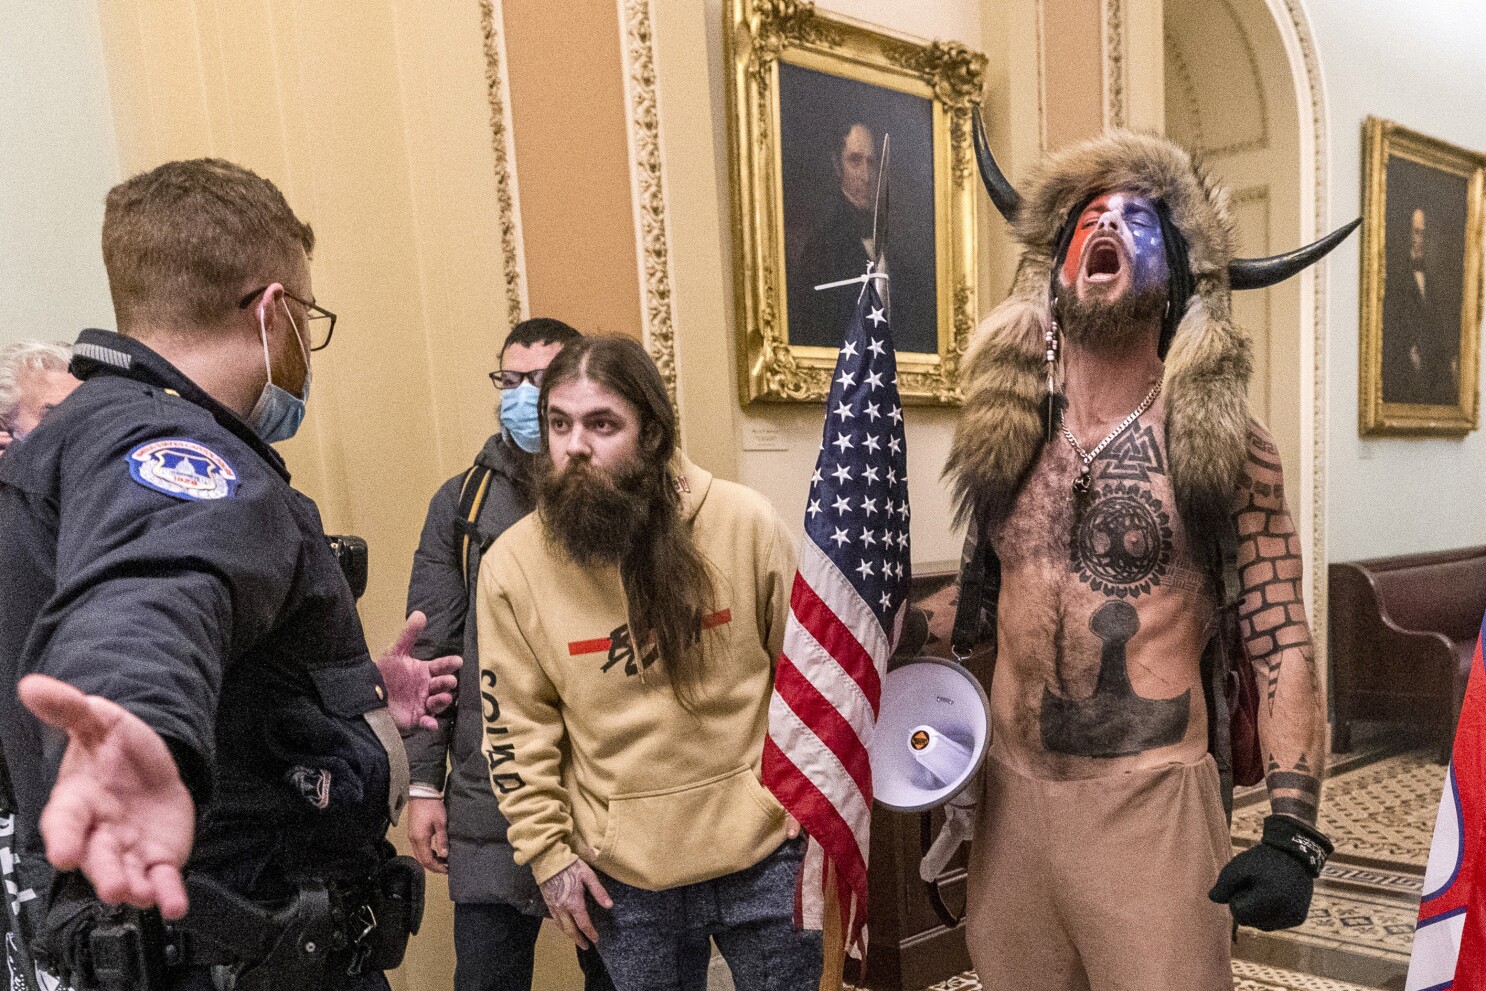 Arizona man who wore horns in Capitol riot pleads guilty - Los Angeles Times